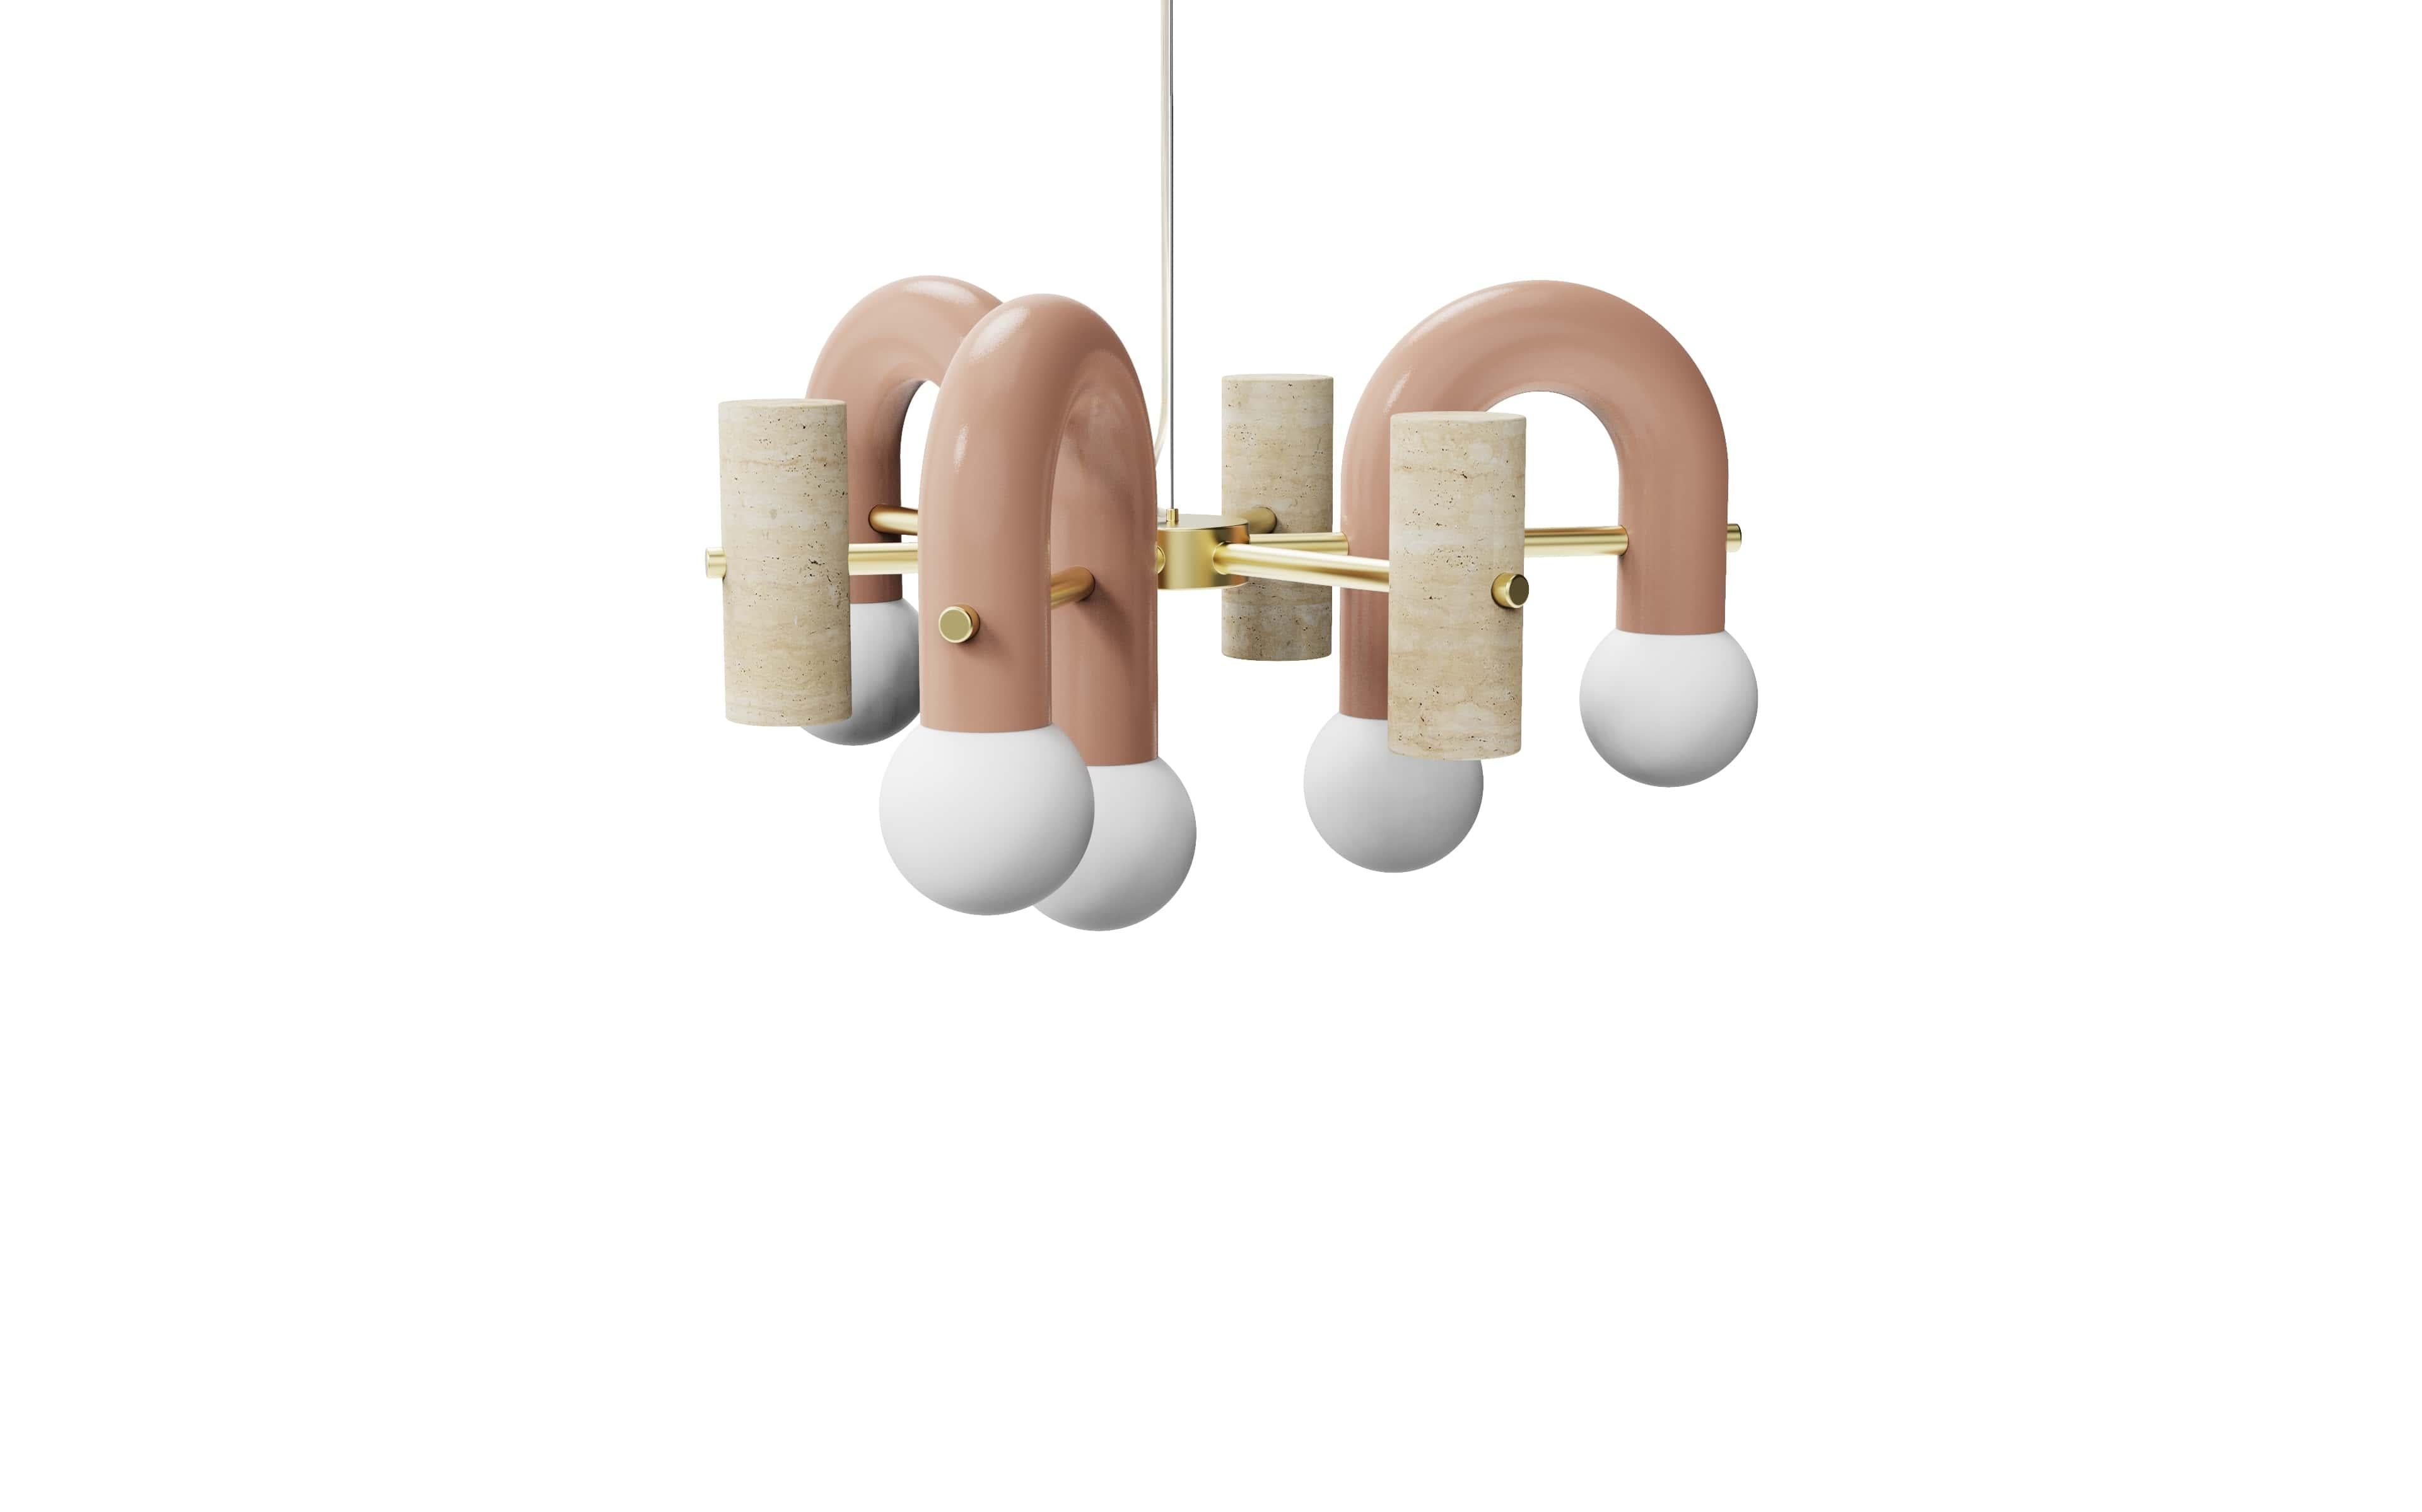 Pyppe suspension lamp 70 by Dooq
Dimensions: 36 x 80 x 80 cm
Materials: Lacquered metal, brass, nickel/copper, travertine

All our lamps can be wired according to each country. If sold to the USA it will be wired for the USA for